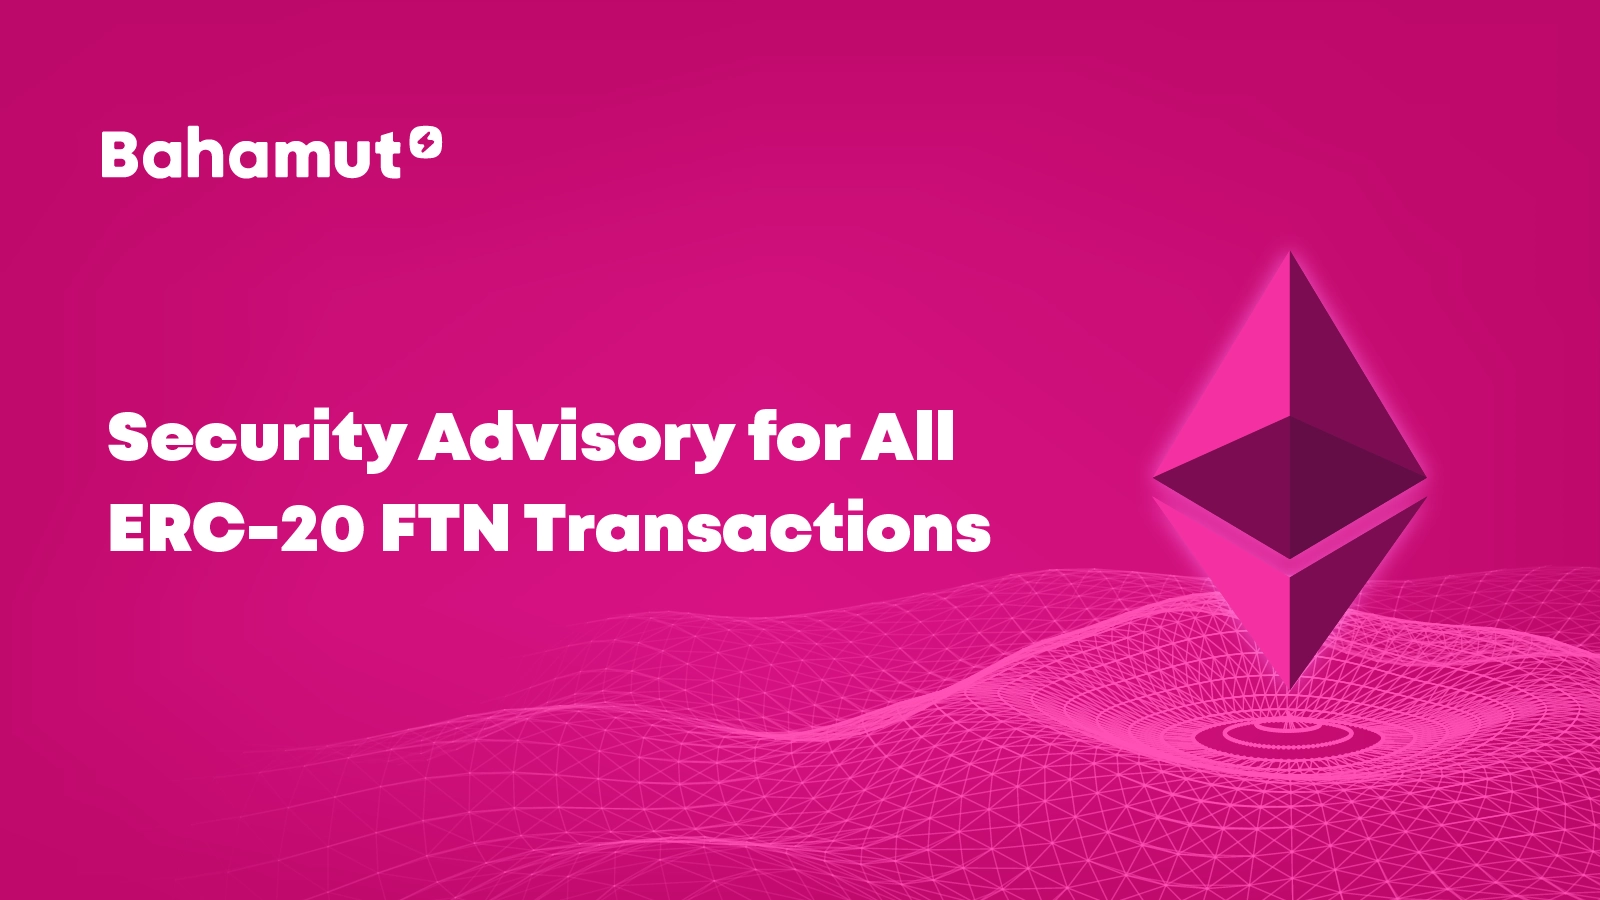 IMPORTANT! Security Advisory for All ERC20 FTN transactions